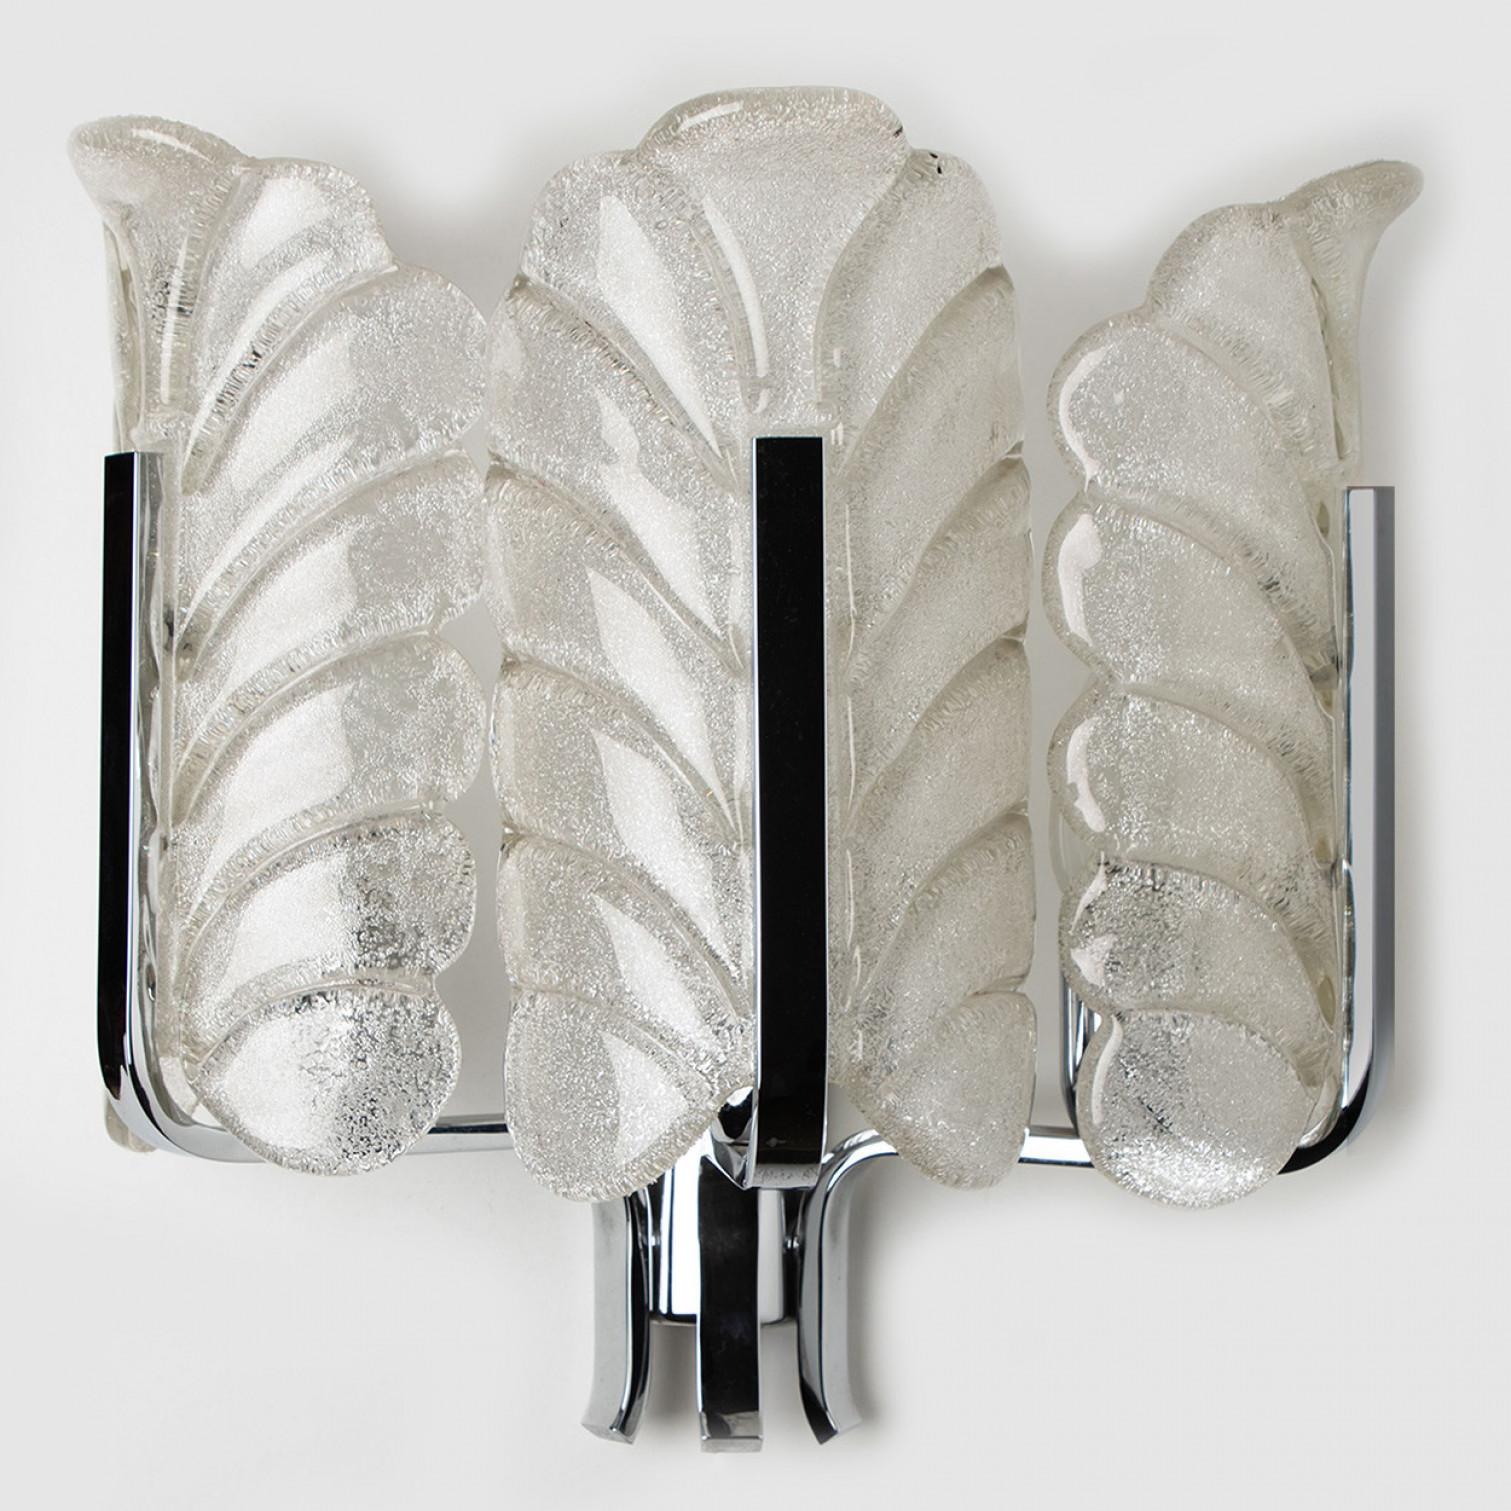 This beautiful wall light with three glass shades and chrome base was produced in the 1960s by the iconic firm of Orrefors and designed by Carl Fagerlund. Beautifully carved clear frosted glass shades in a leaf design on chrome fittings. The leaves